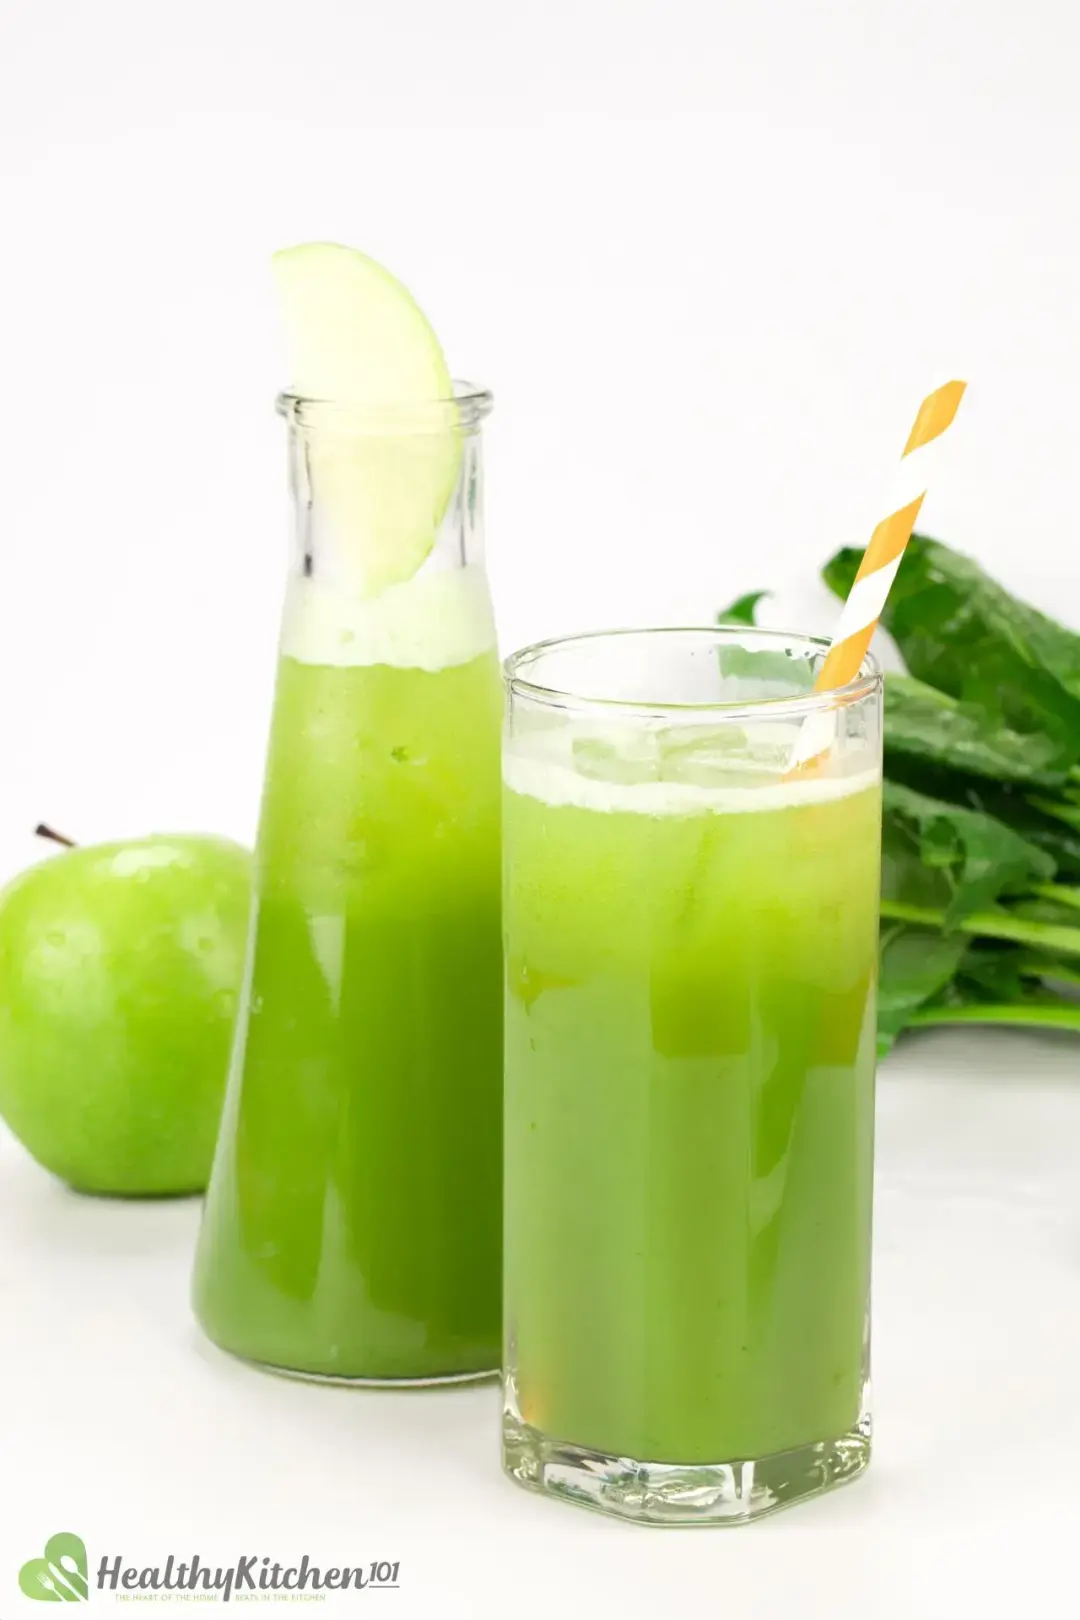 A bottle-neck bottle next to a tall glass of green apple juice and green apple, with some spinach in the back